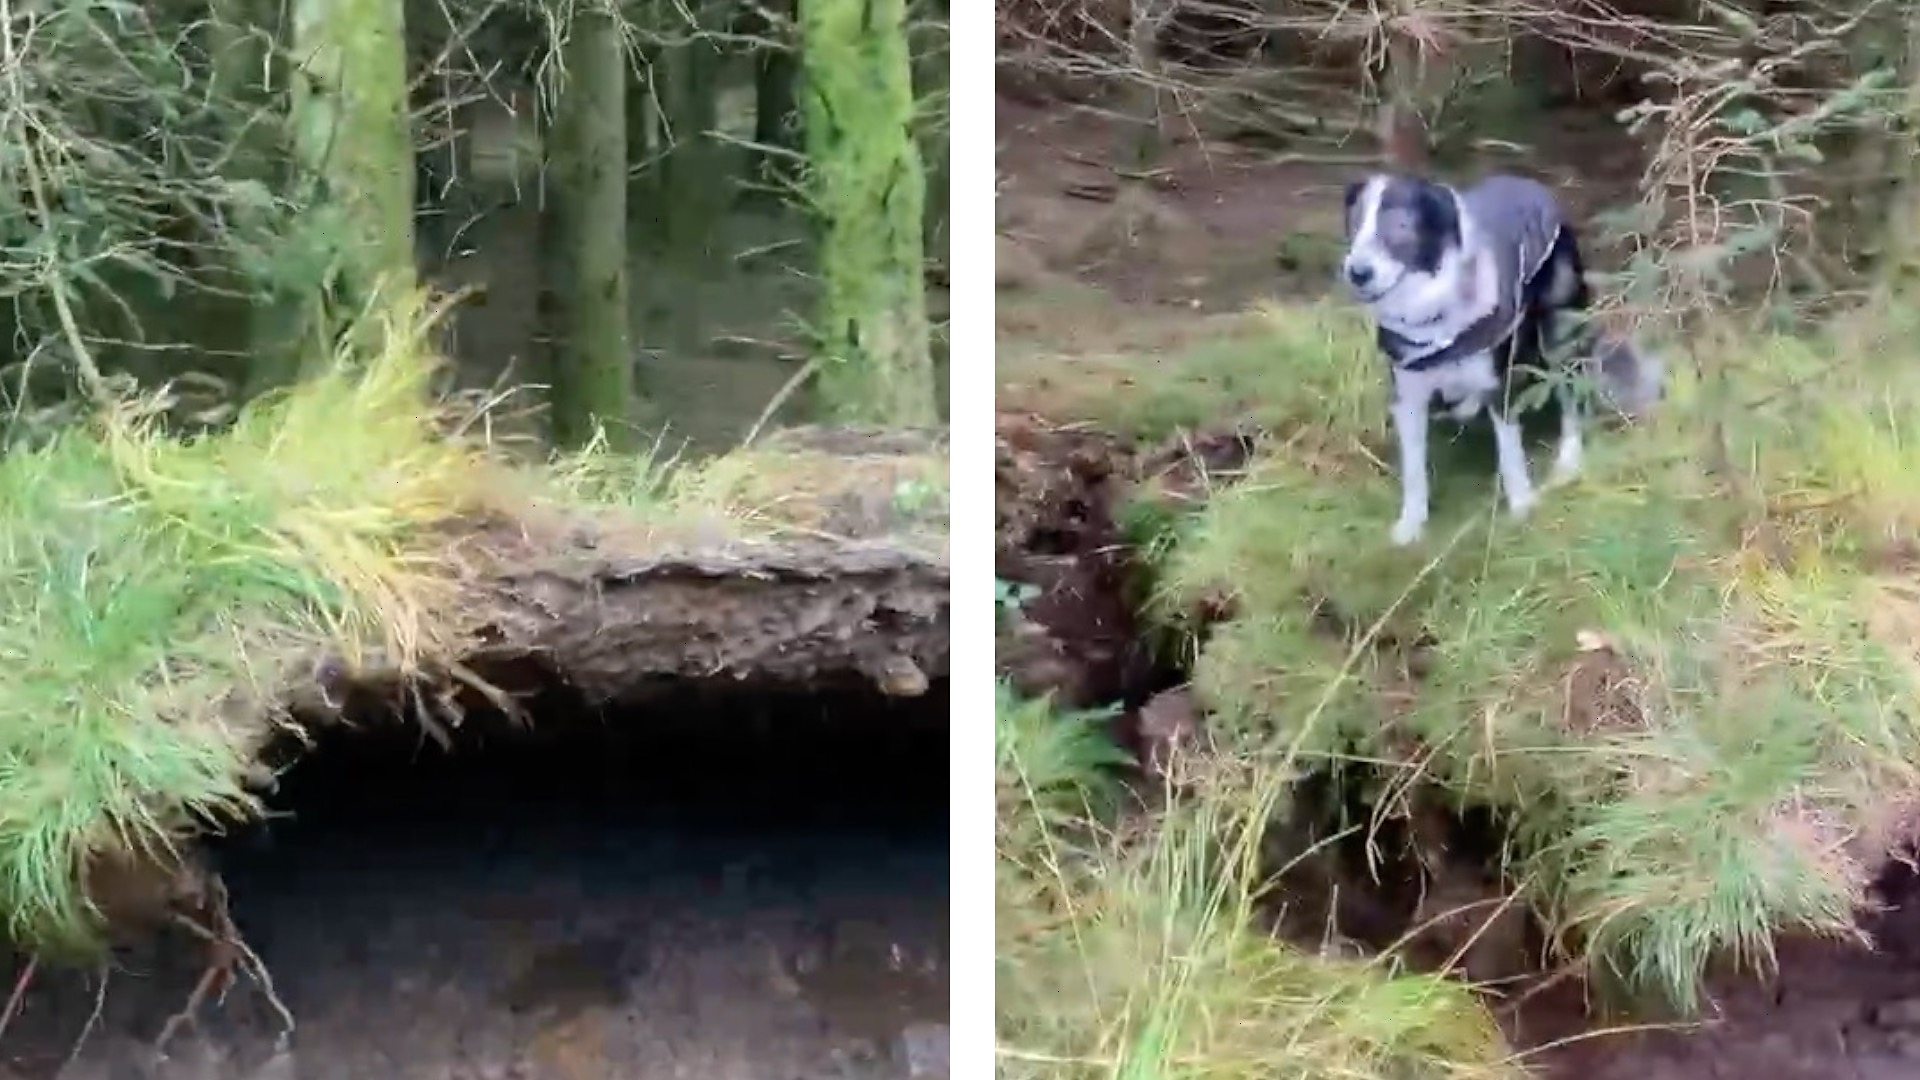 Dog walker films winds lifting forest floor during Storm Babet in Scotland  - BBC News